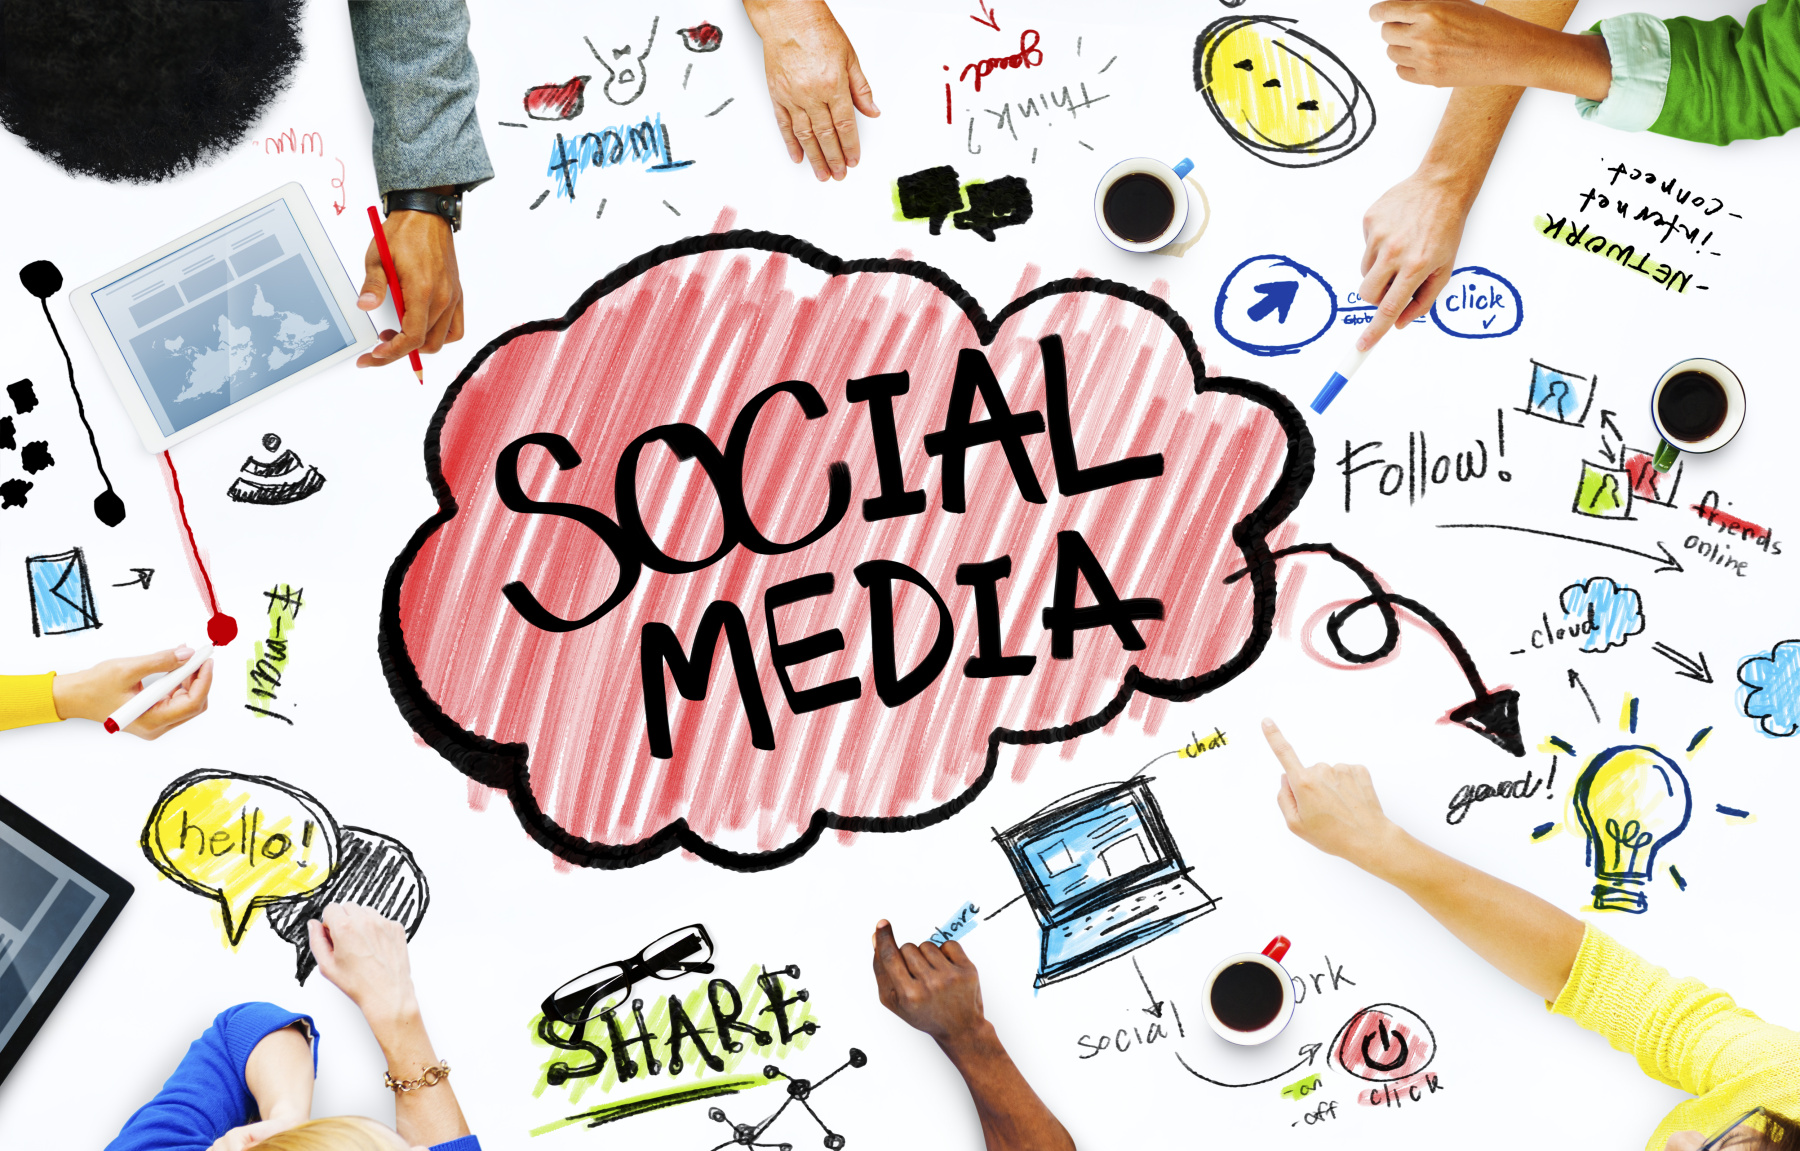 Social Media: Is it good for business?